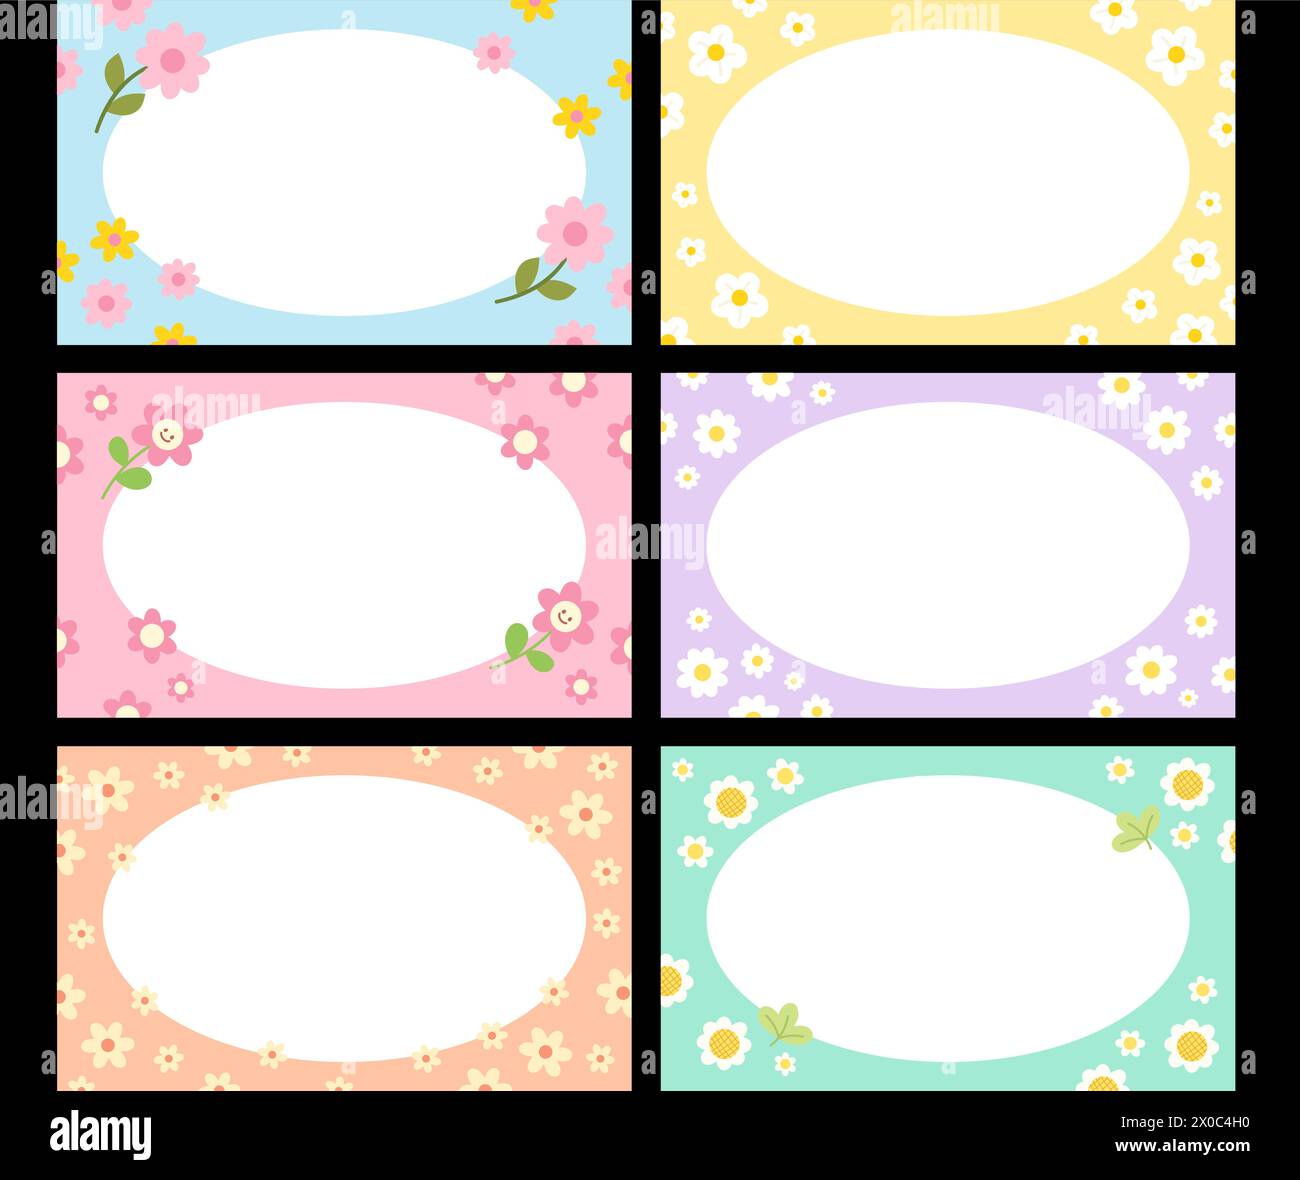 Pastel frame set with flowers for banner, background, wallpaper, ad template, floral pattern, picnic, spring, summer, nature, garden, name tags, memo Stock Vector